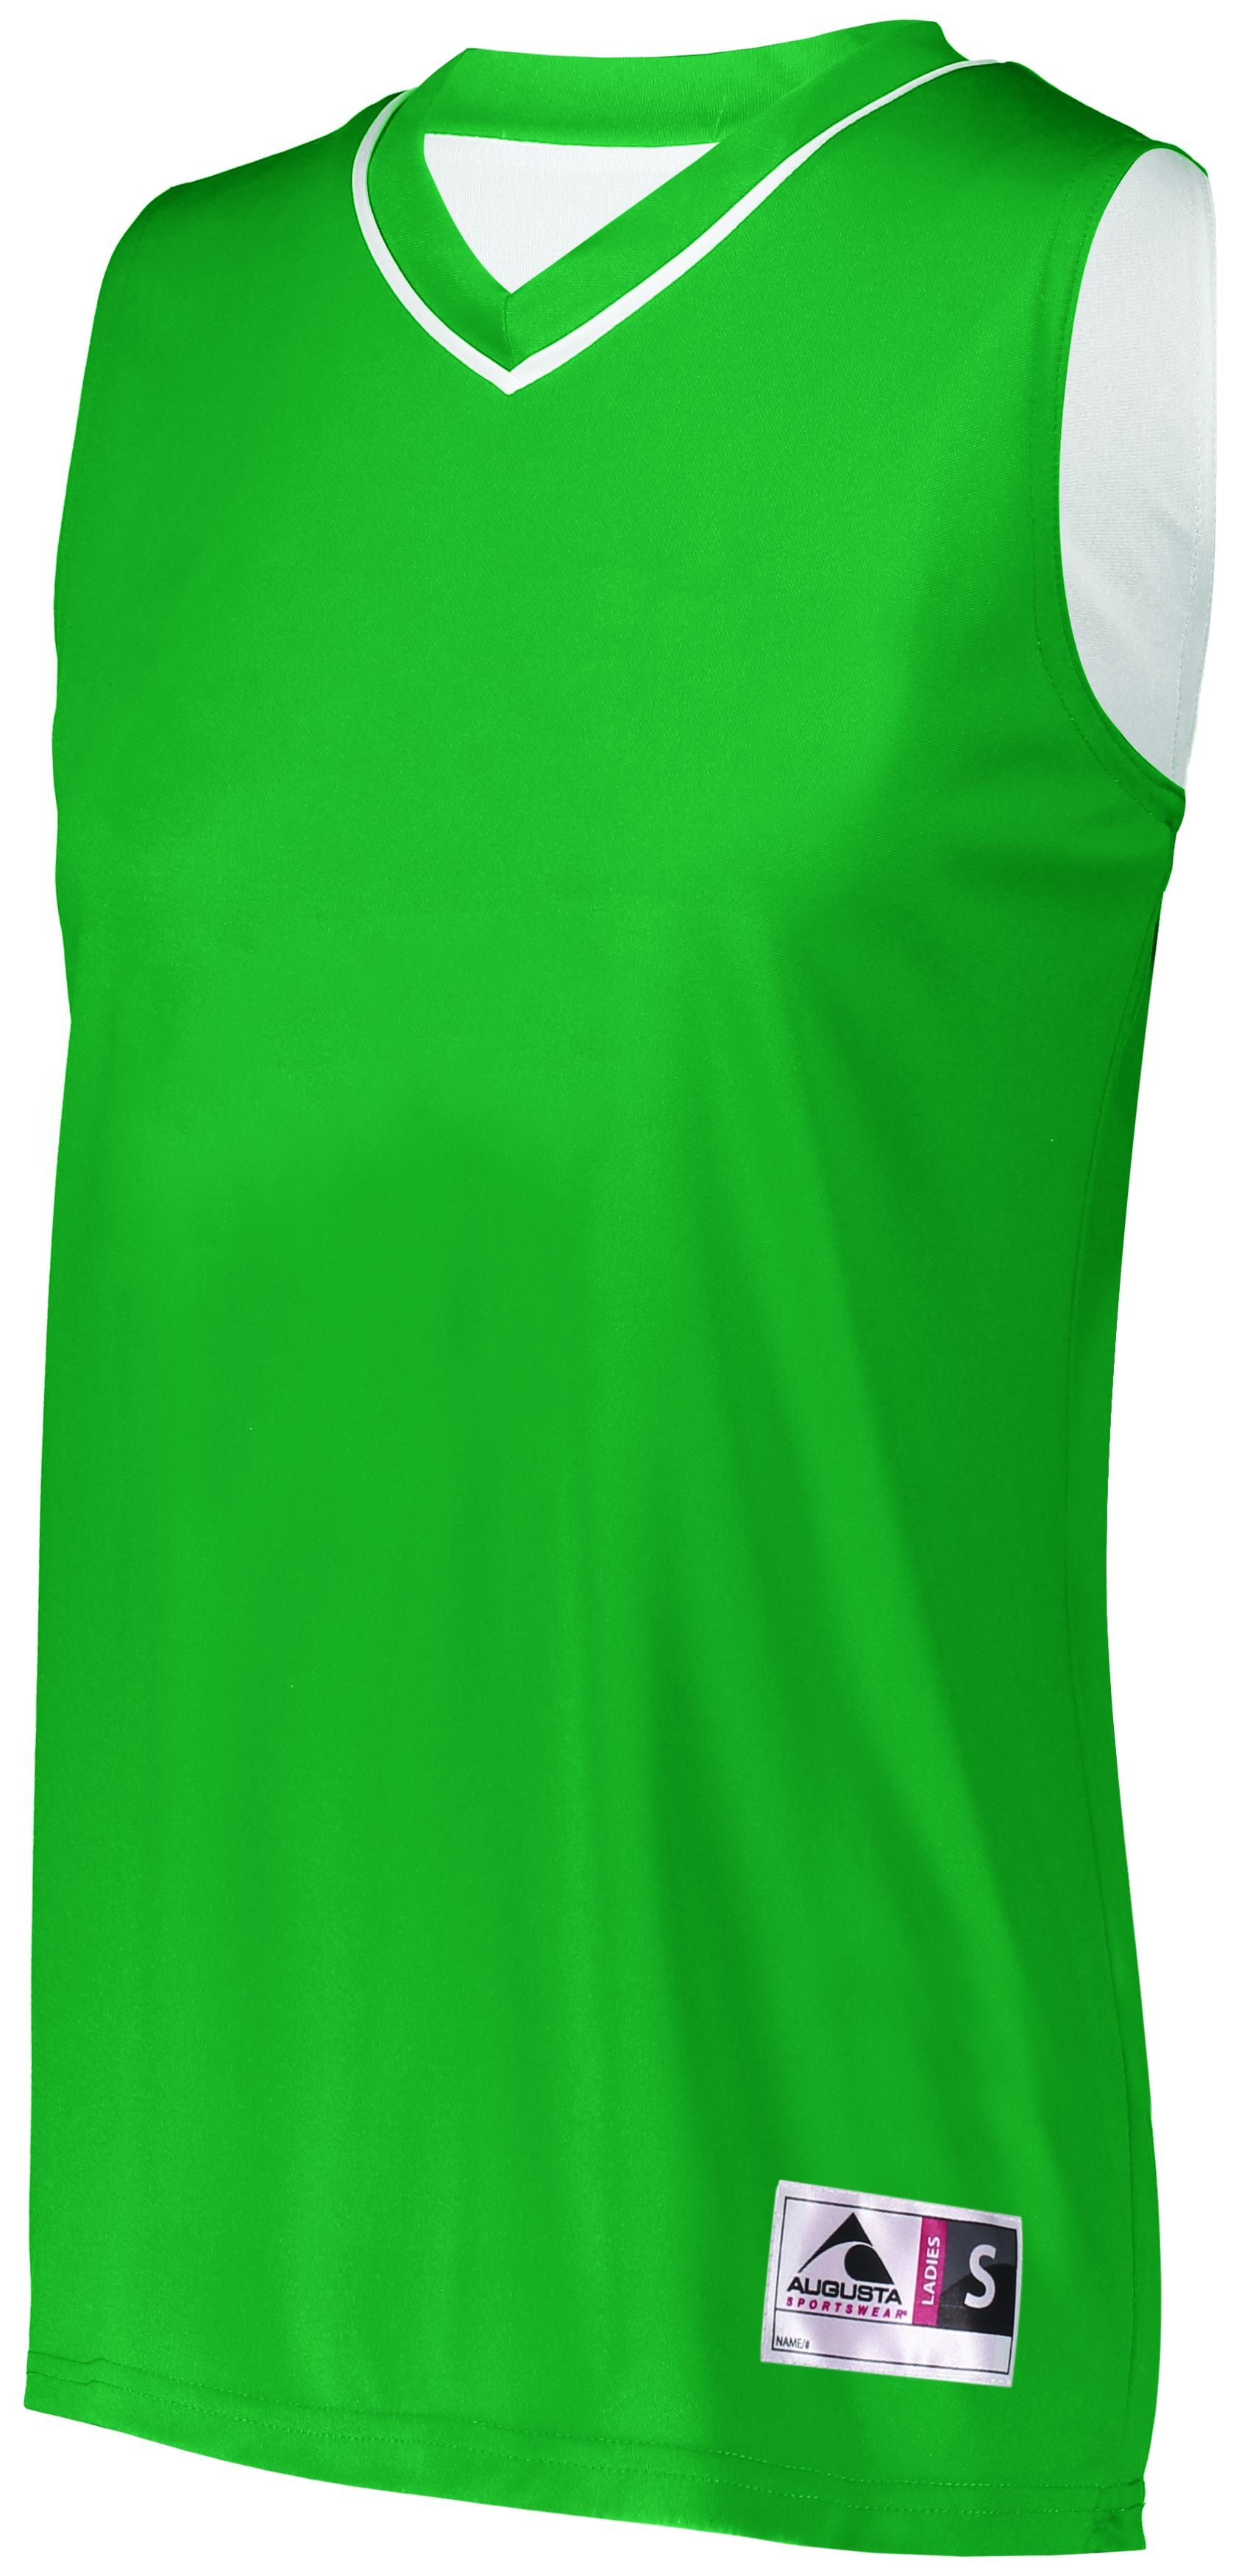 Augusta Sportswear Ladies Reversible Two-Color Jersey in Kelly/White  -Part of the Ladies, Ladies-Jersey, Augusta-Products, Basketball, Shirts, All-Sports, All-Sports-1 product lines at KanaleyCreations.com